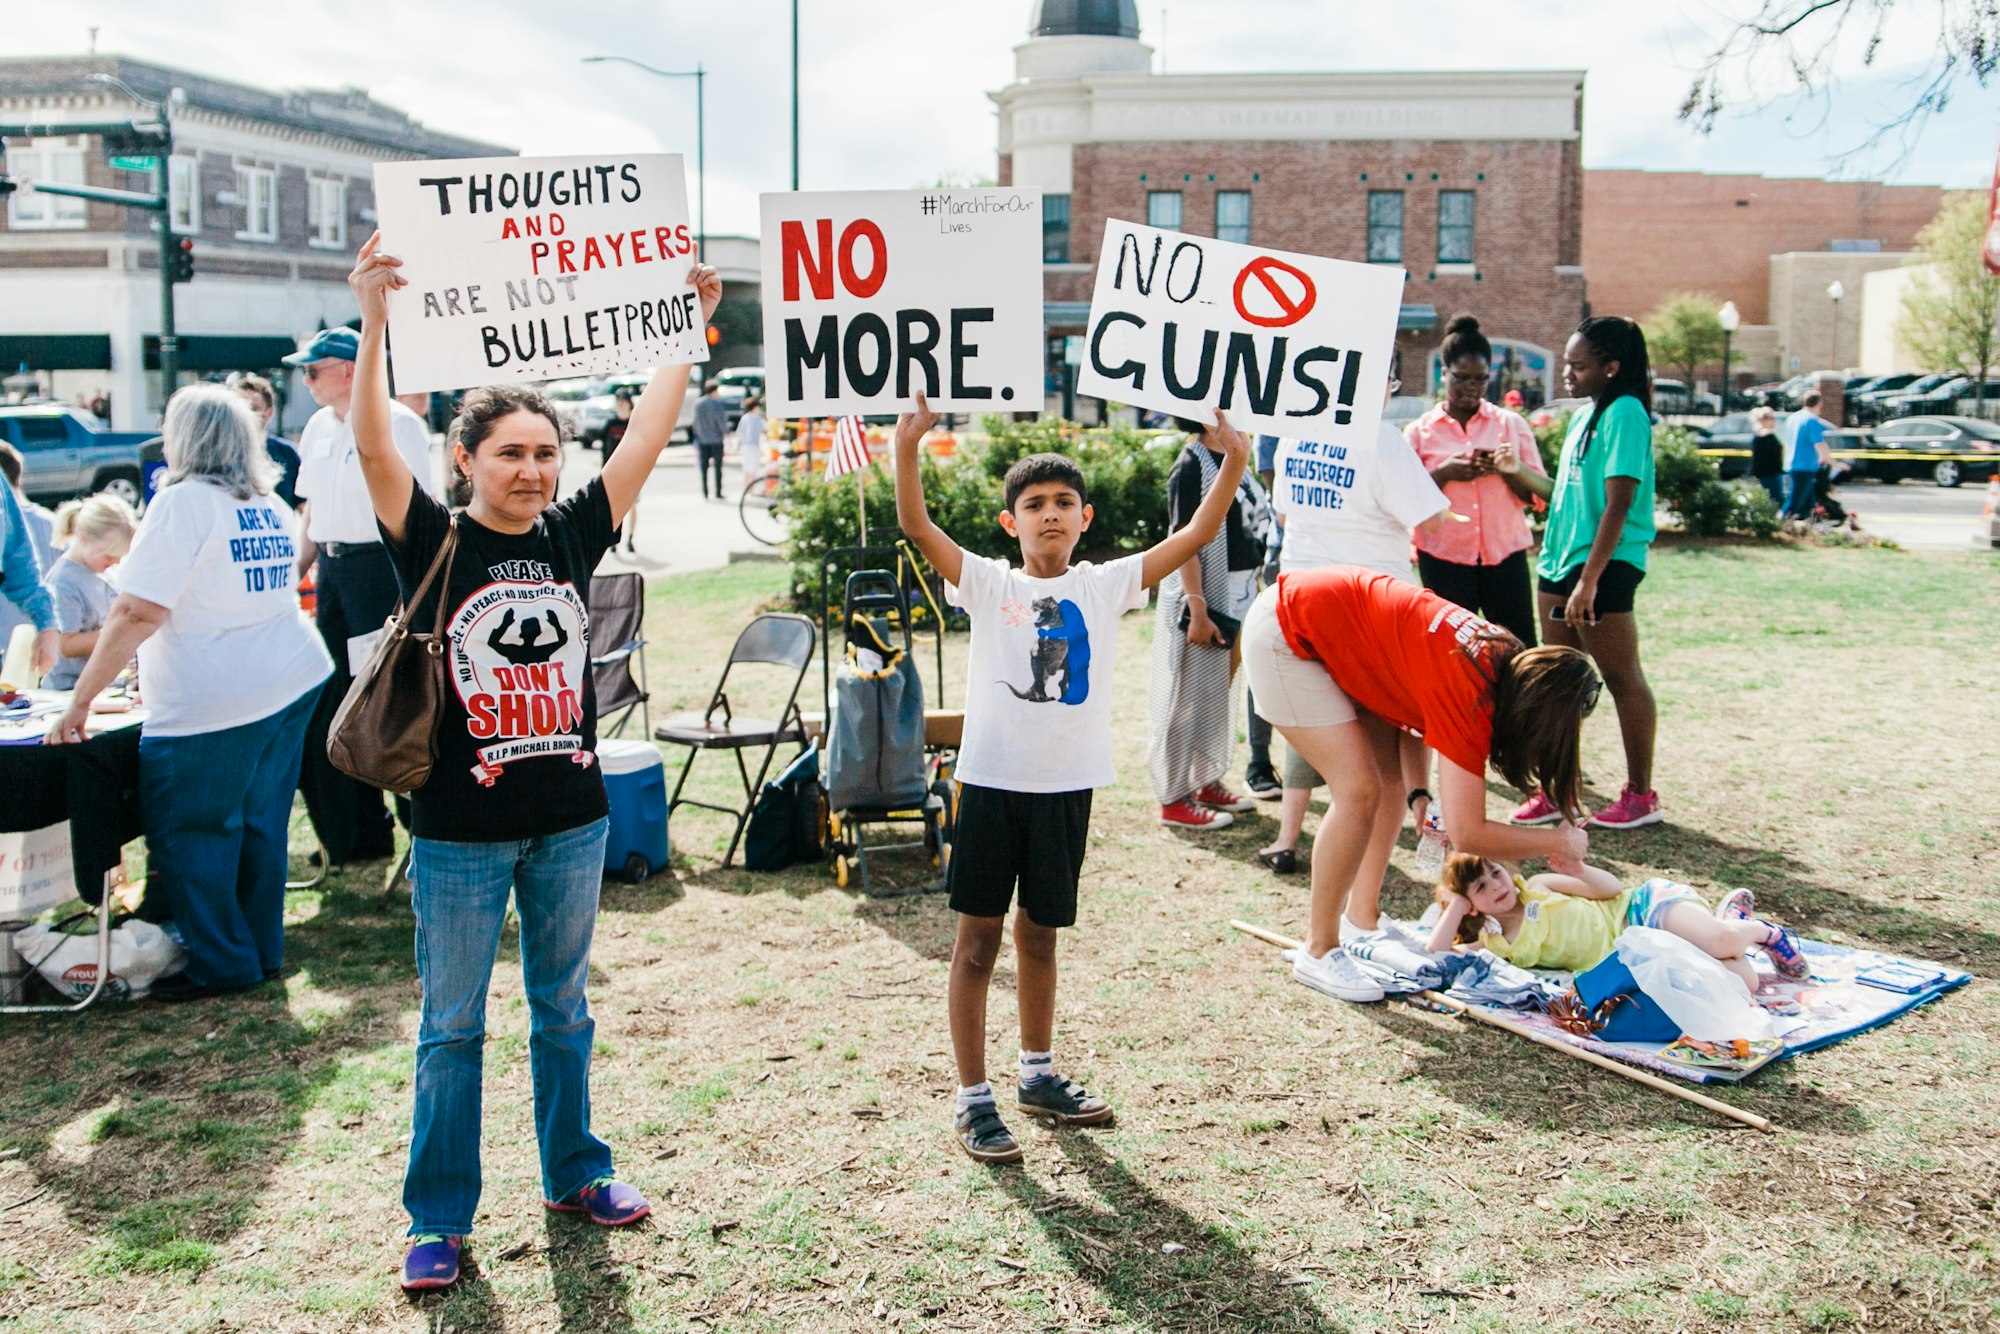 A North Texas mother and her son hold protest signs at the March for Our Lives sister rally in Denton, Texas on March 24th, 2018. In the background, volunteers register people to vote.